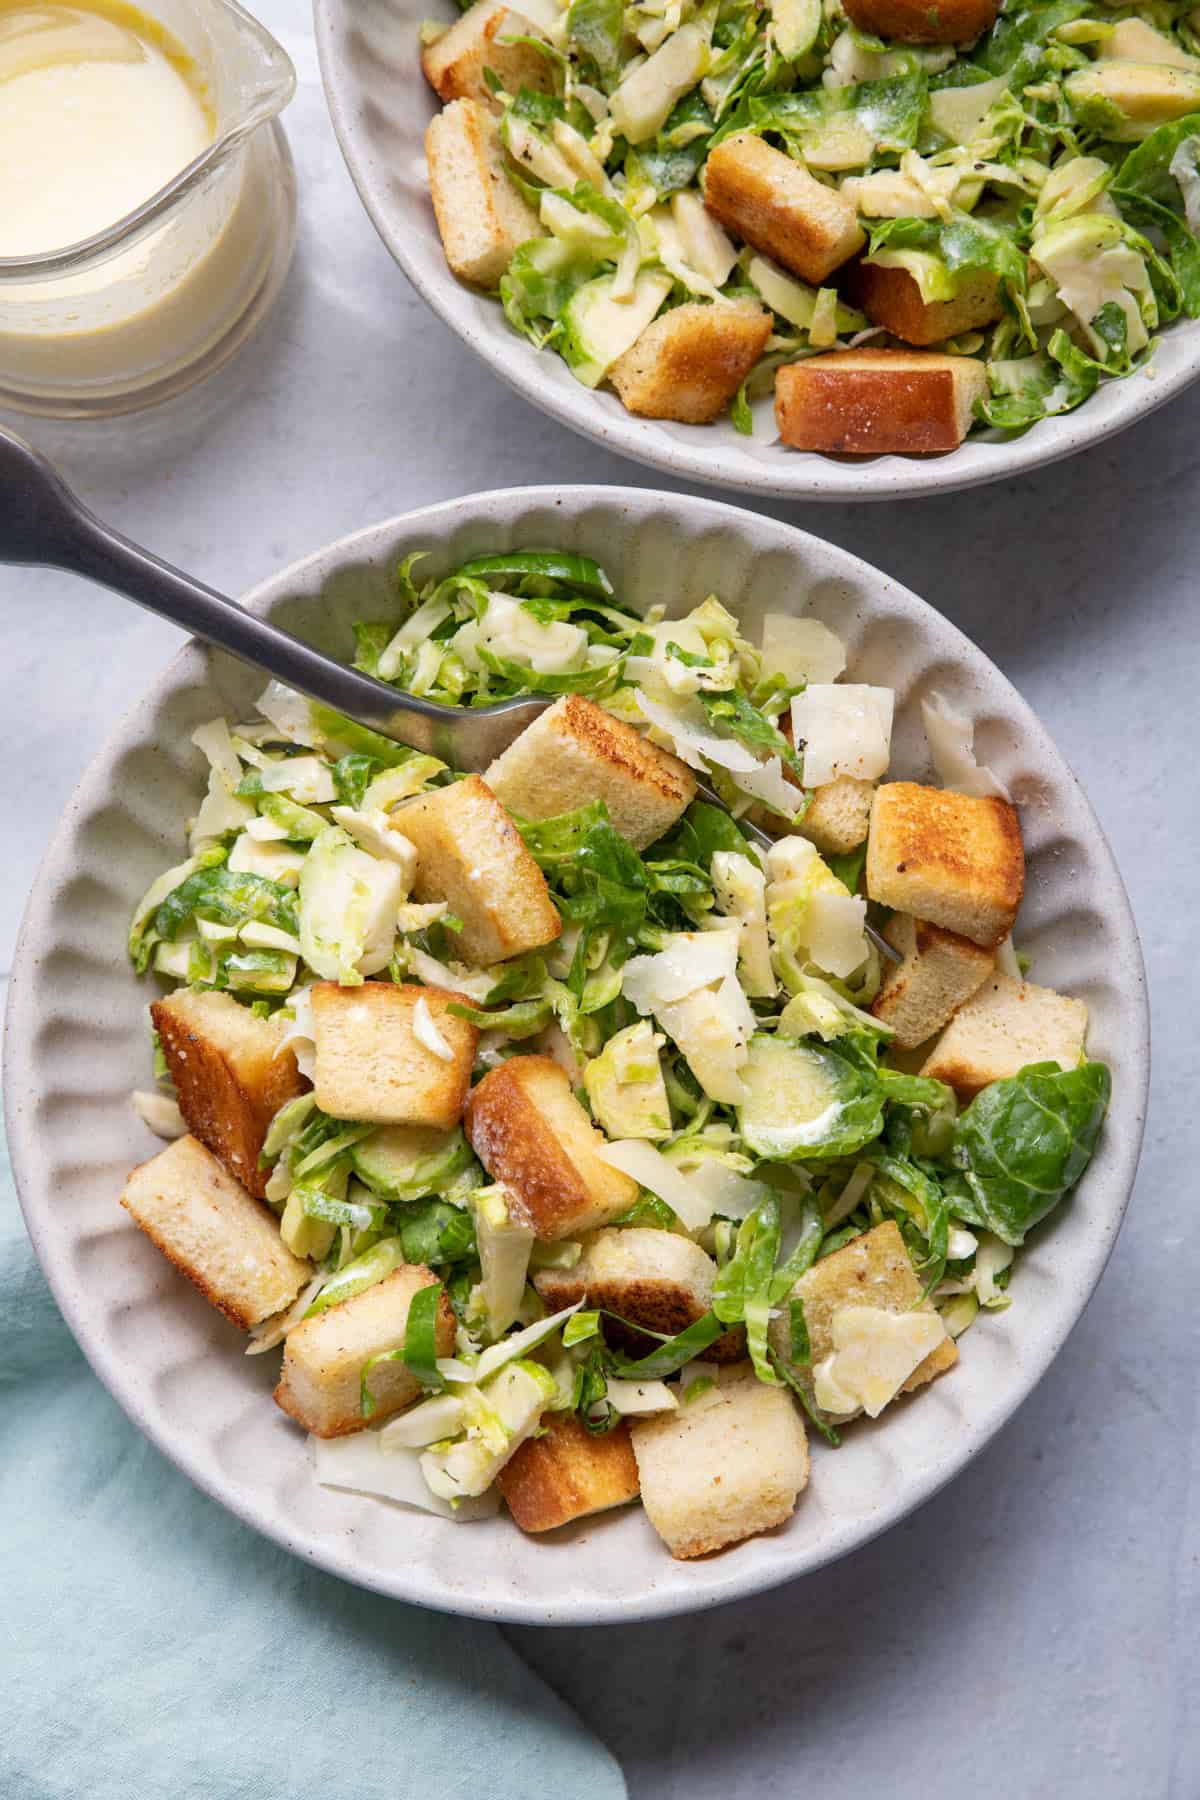 Two small bowls of the brussel sprout salad with croutons and dressing on the side